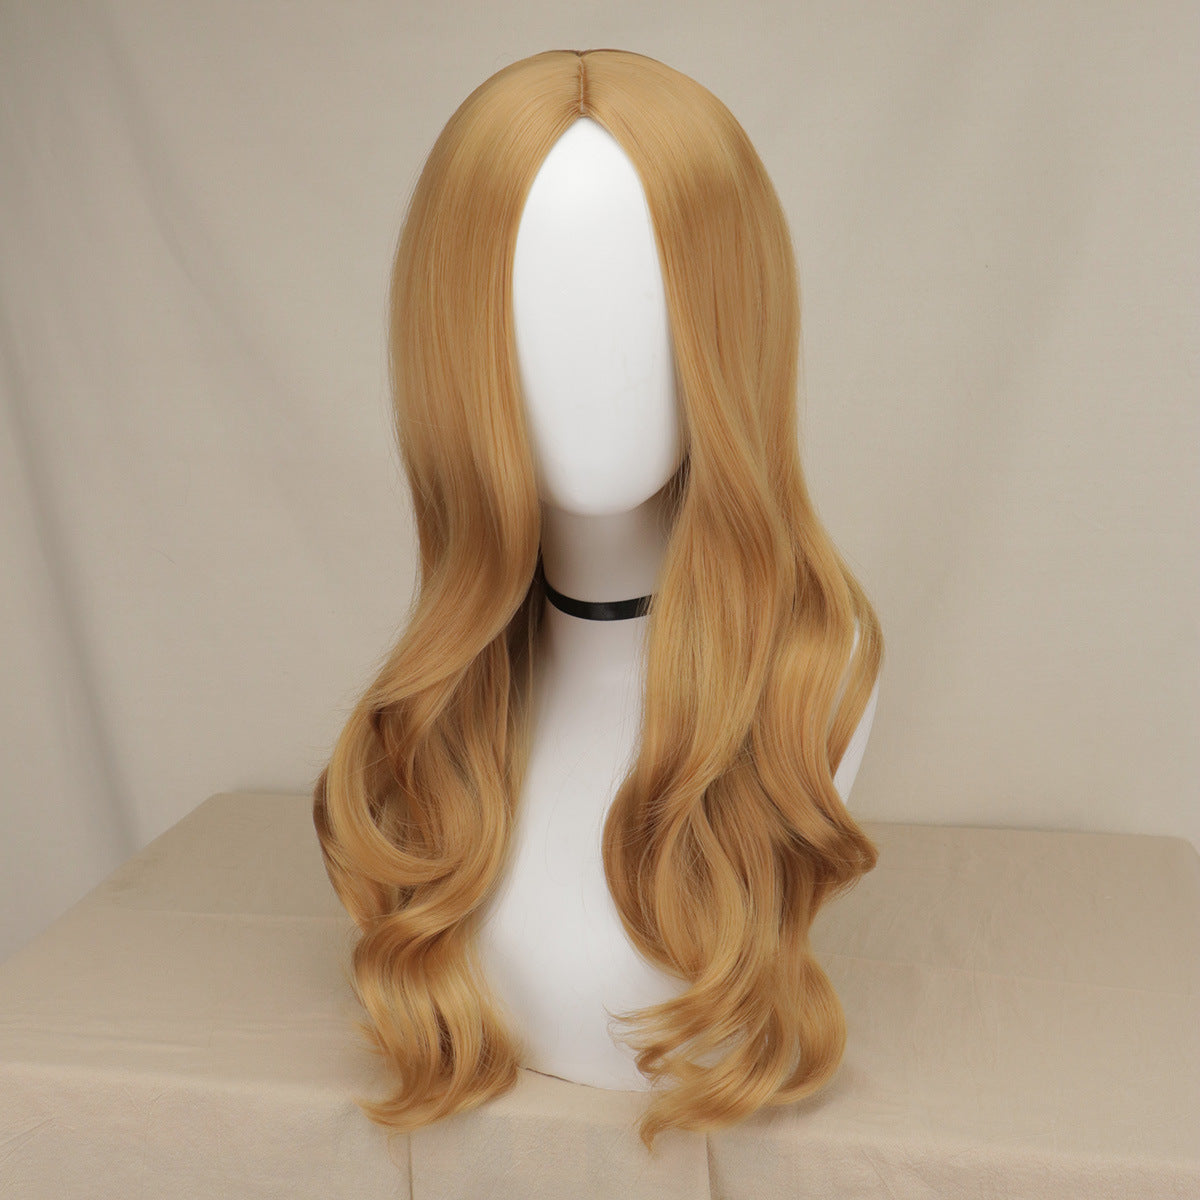 Wig, mid-length curly hair, light brown curly hair